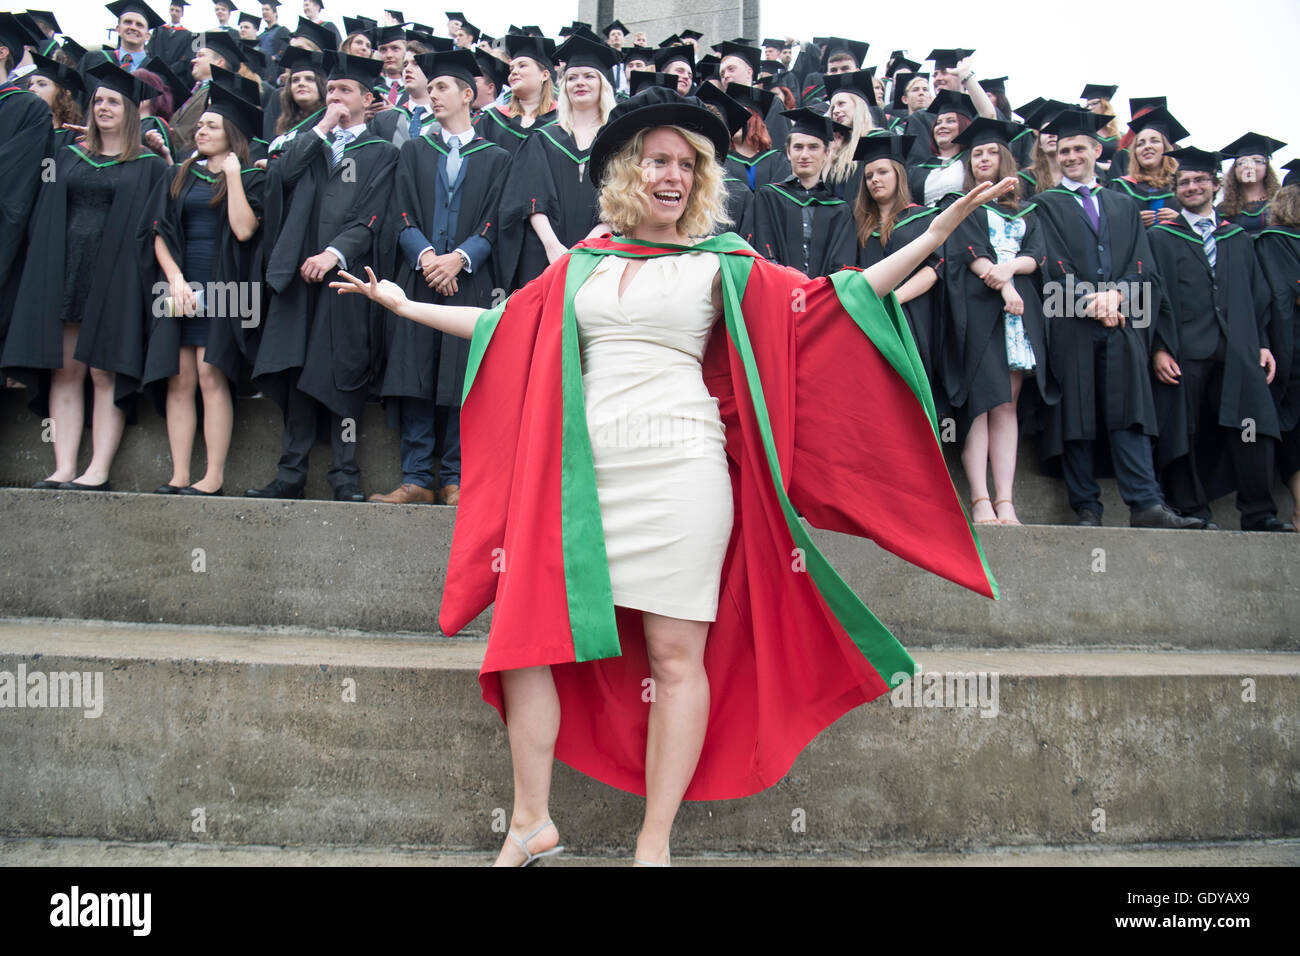 Higher Education in the UK: A successful woman PhD (Doctoral) degree  graduate standing and posing in front of a group Aberystwyth university  students wearing traditional gowns, capes and mortar boards at their